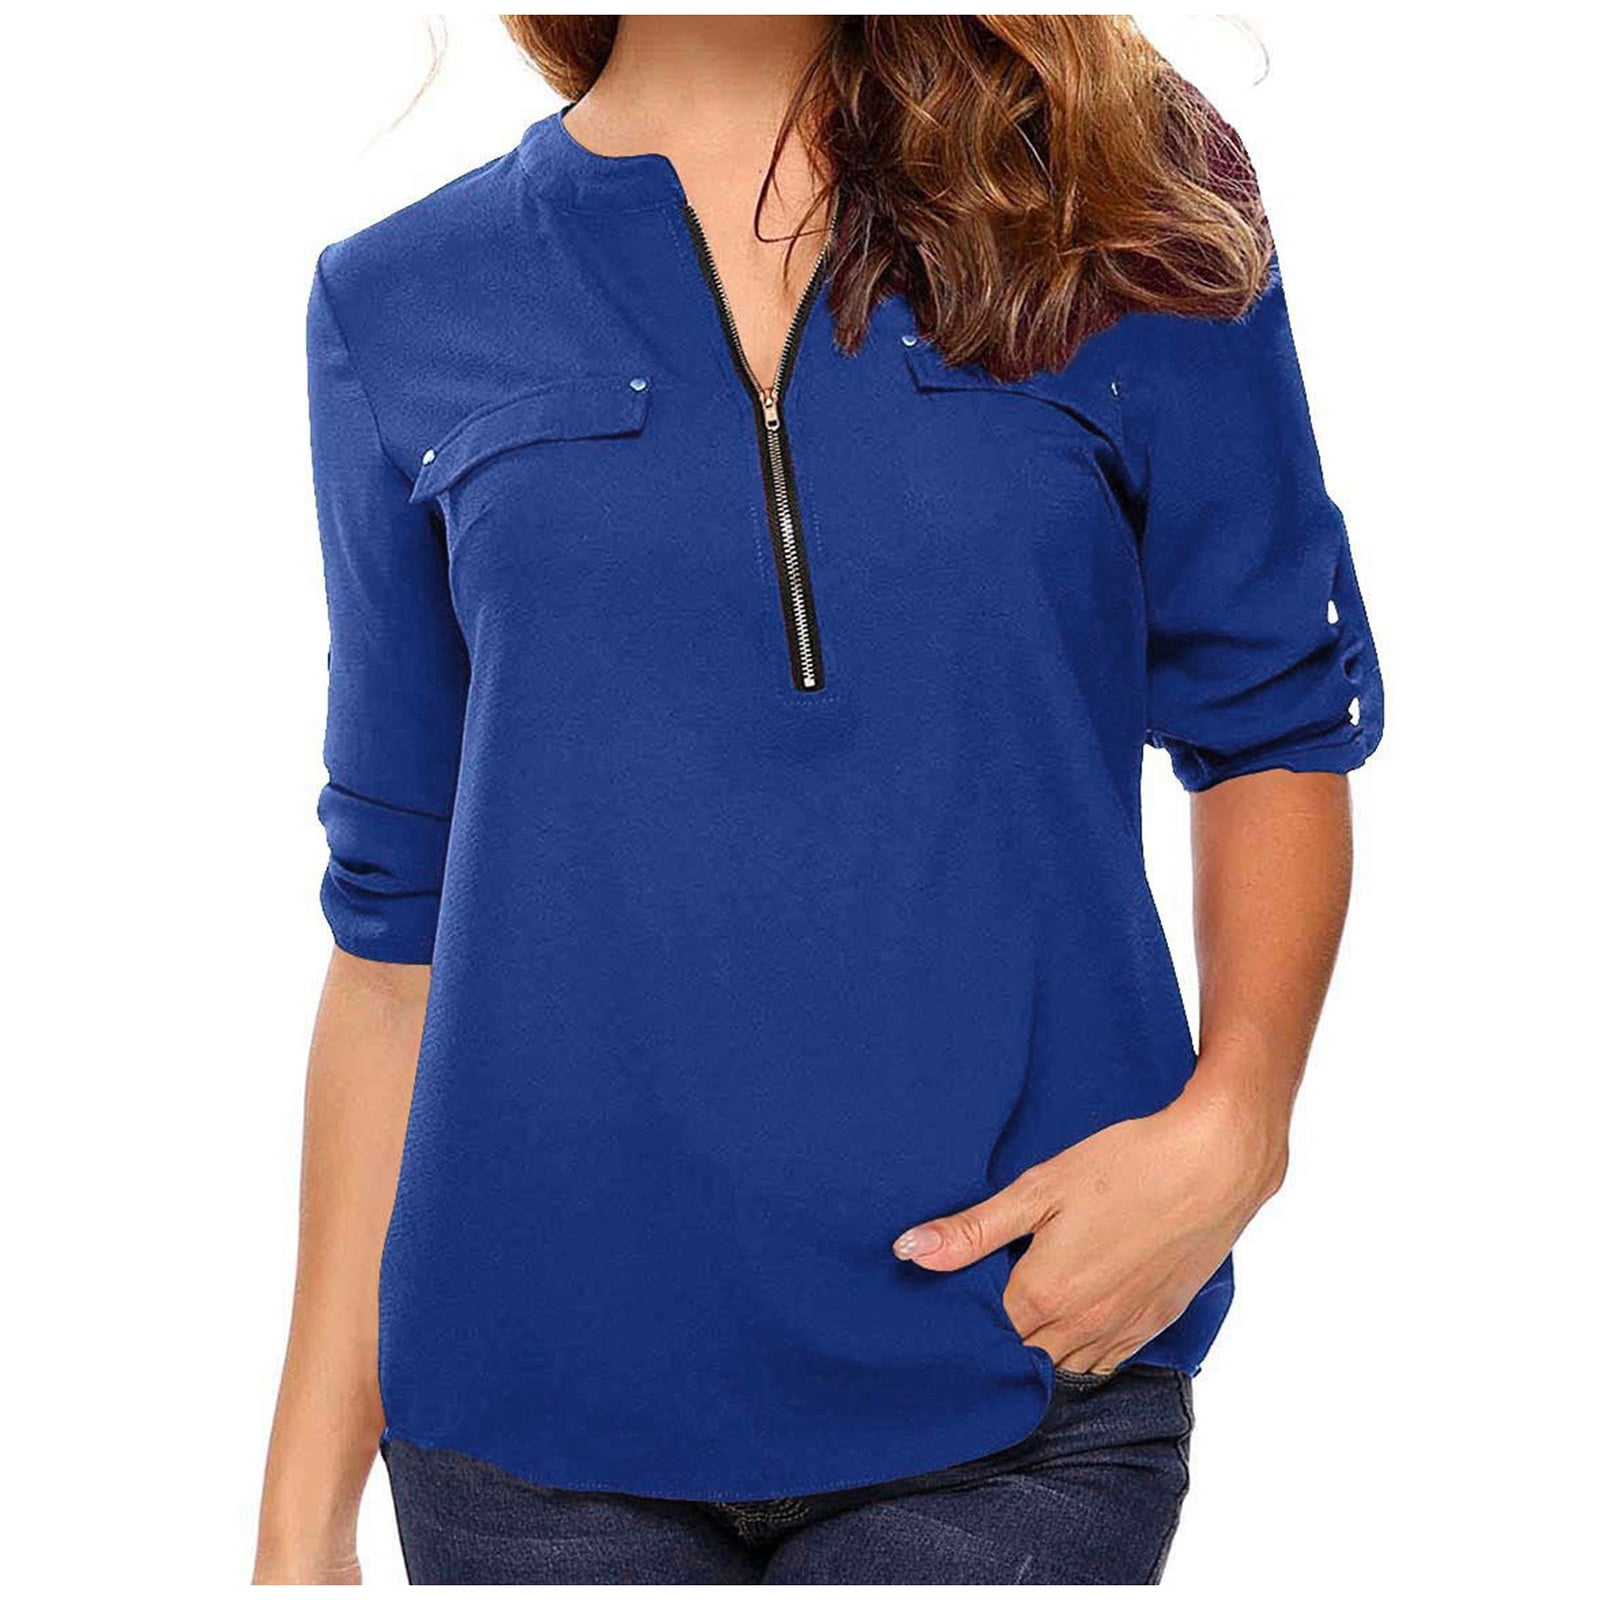 ZQGJB Women Casual Summer Tops Button Rolled-up Long Sleeve Zipper V Neck T  Shirts Plus Size Chiffon Elegant Blouse Loose Tunic Top with Pockets Blue M  